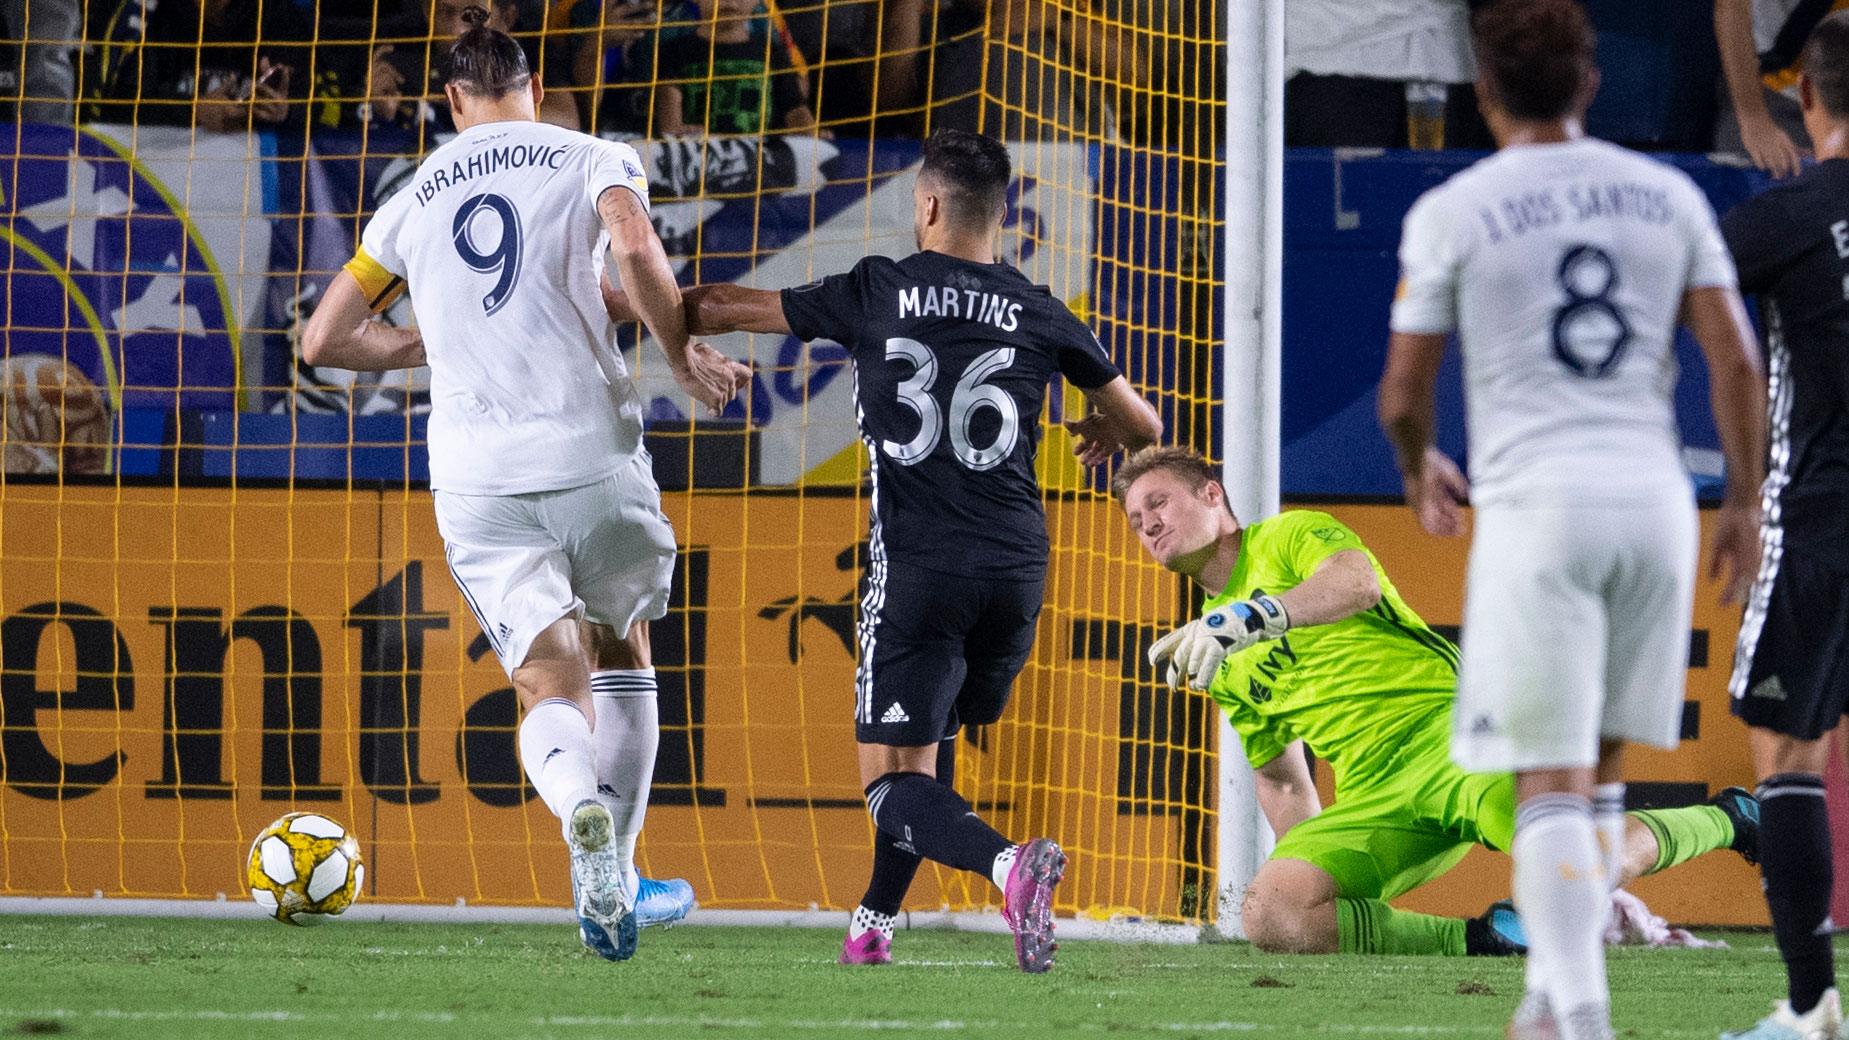 Ibrahimovic's hat trick sparks Galaxy in 7-2 rout of Sporting KC